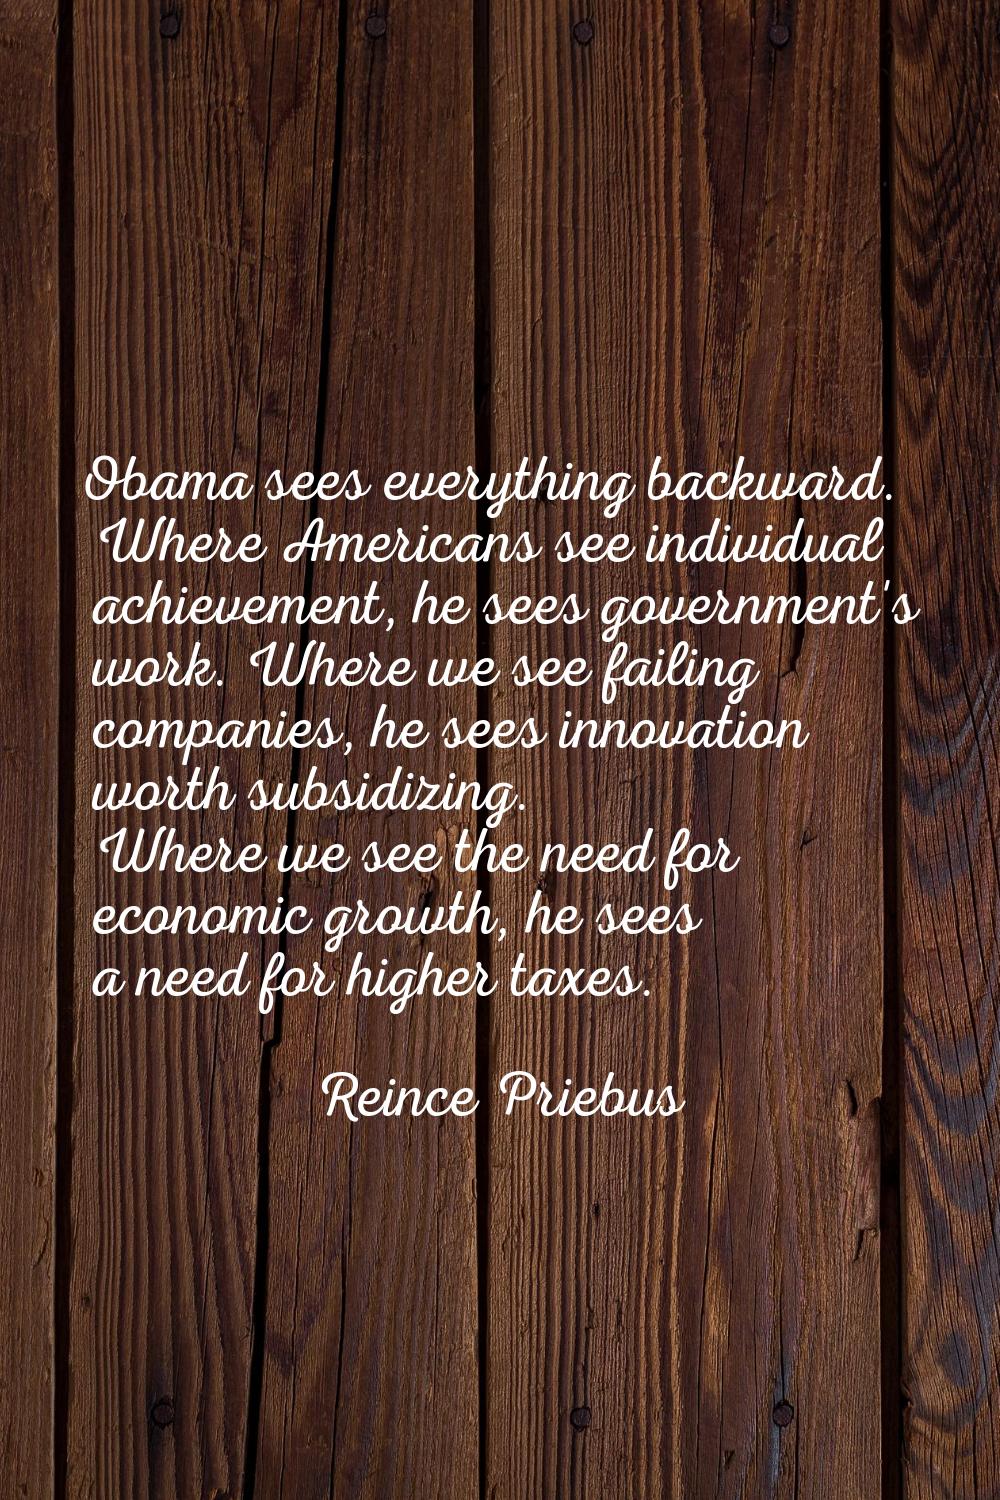 Obama sees everything backward. Where Americans see individual achievement, he sees government's wo